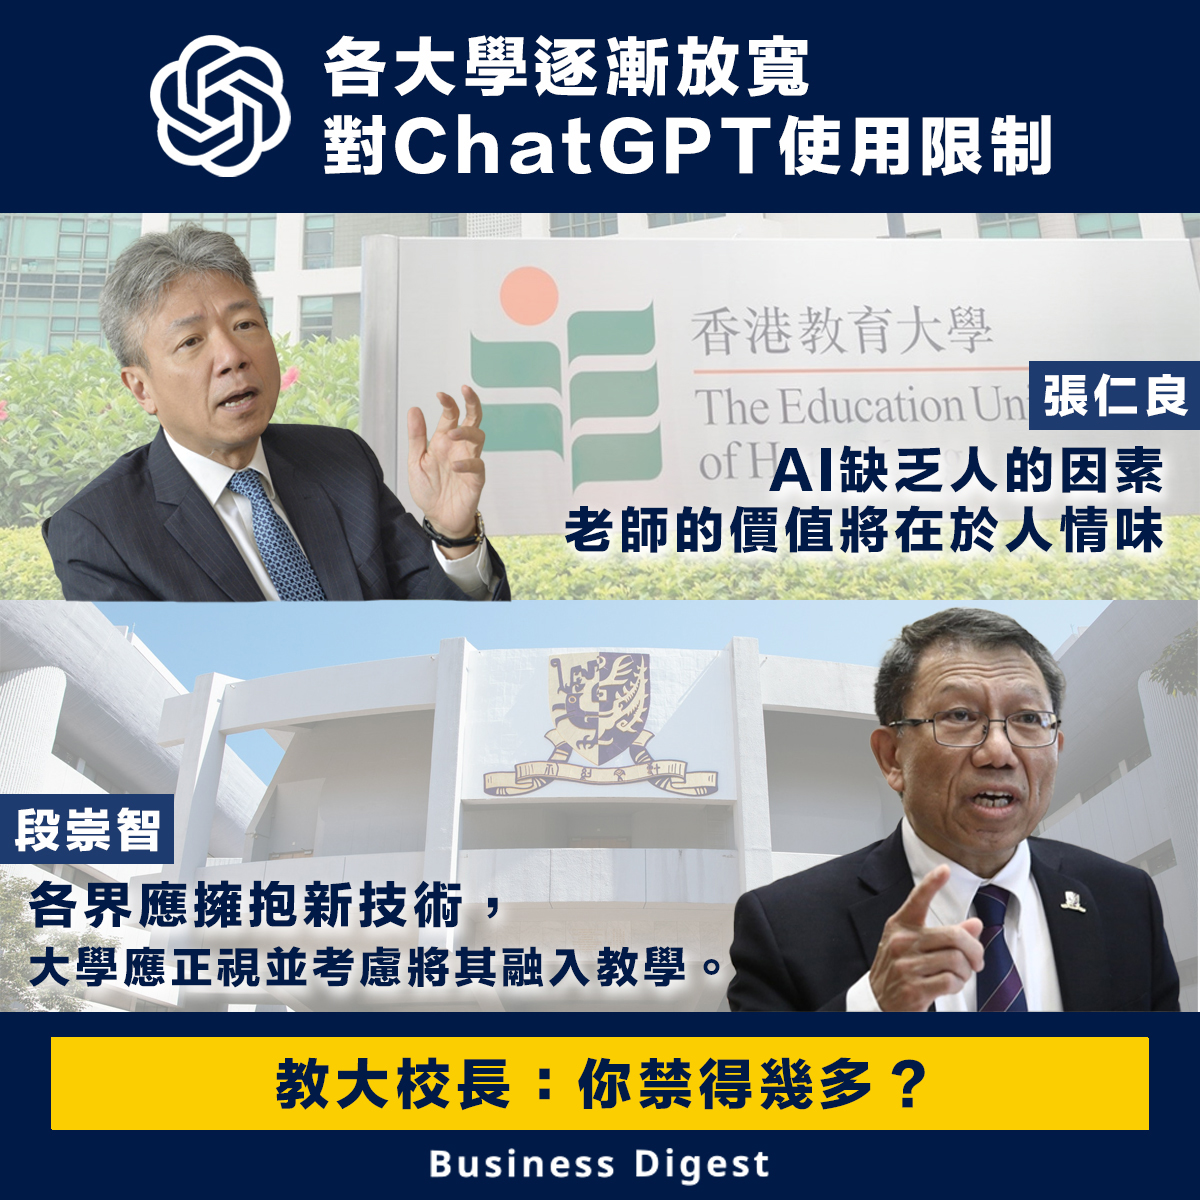 【 #ChatGPT 】本地大學逐漸放寬對ChatGPT使用限制 Major universities are gradually relaxing restrictions on the use of ChatGPT